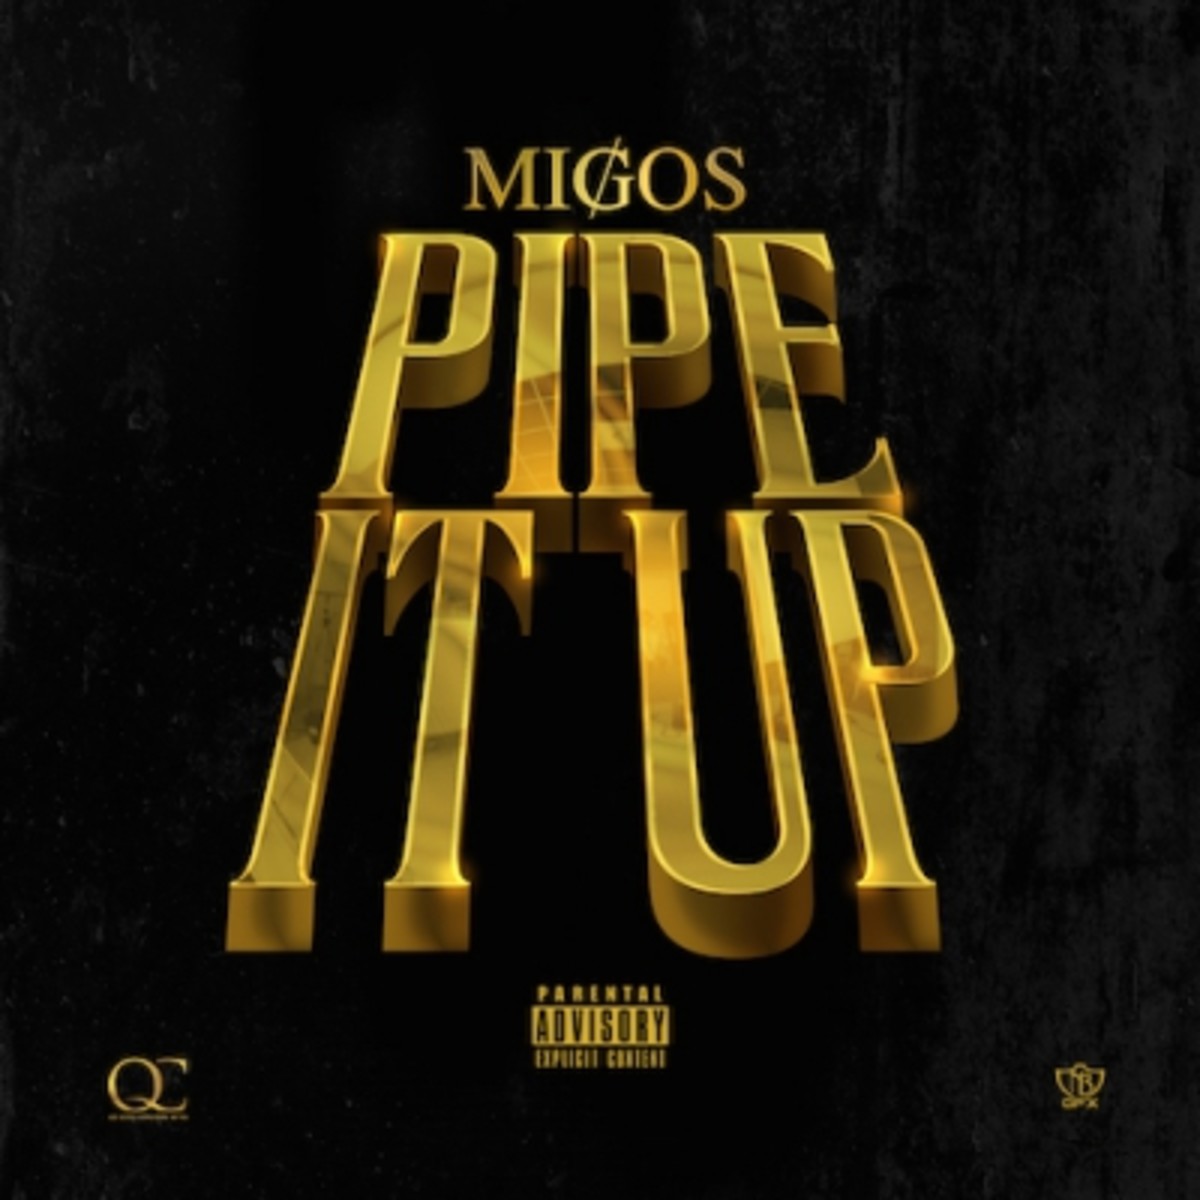 migos-pipe-it-up.jpg